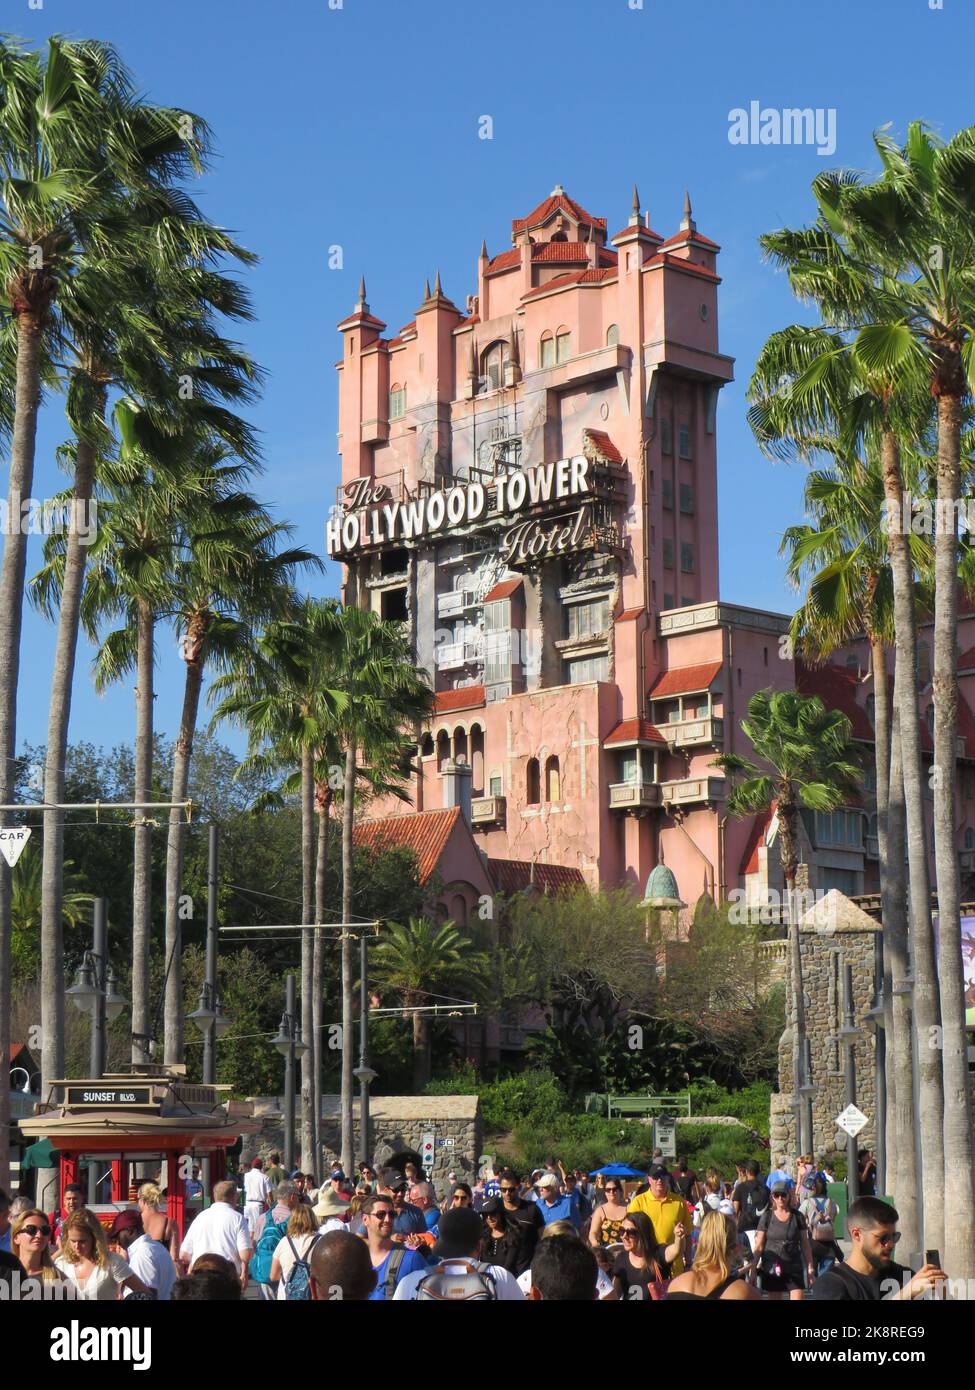 A vertical shot of the Hollywood Tower Hotel with people and palm trees around, Disney World, Orlando Stock Photo